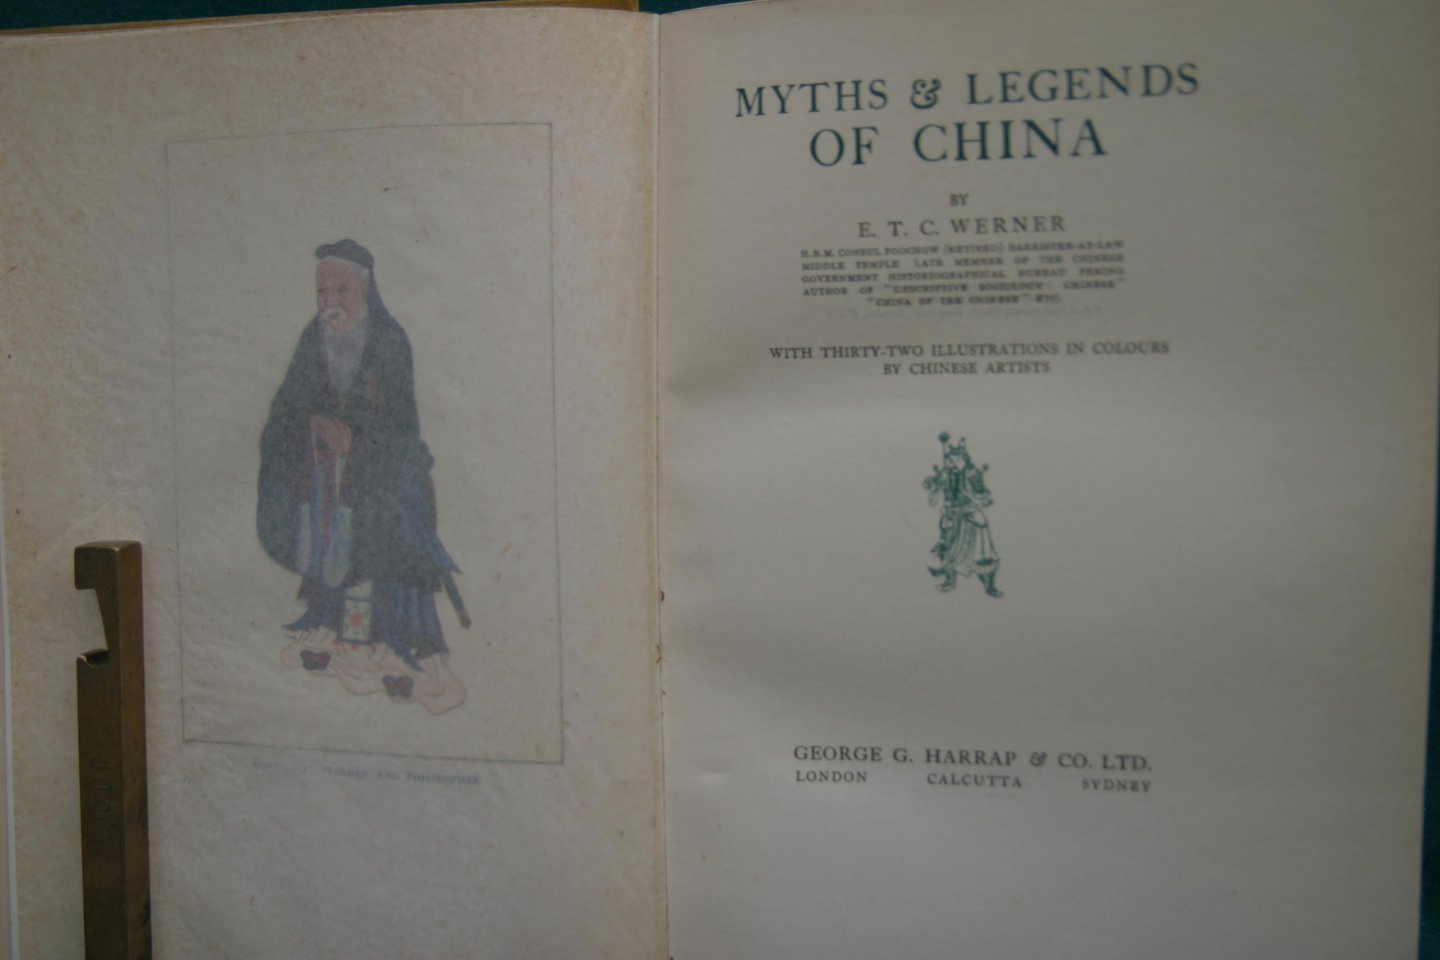 Chalmers Werner - Myths and Legends of China